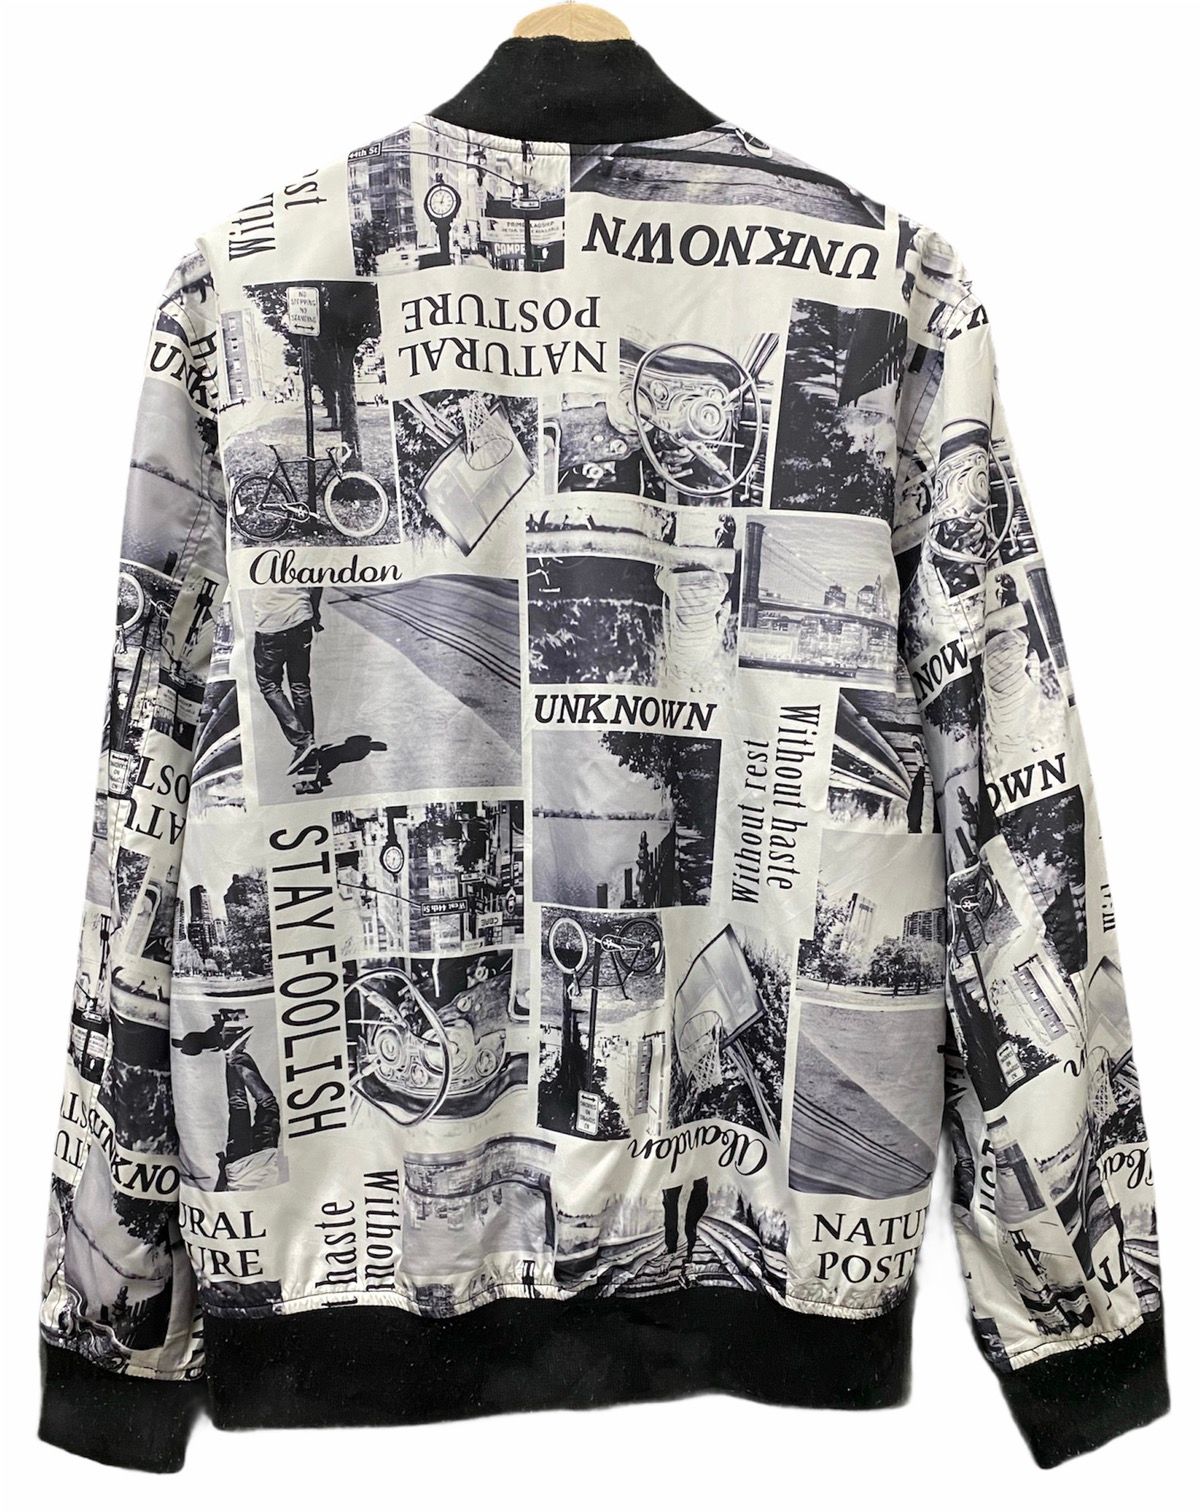 Archival Clothing - SUGGESTION🇯🇵NEWSPAPER GRAPHICS BOMBER JACKET LIKE SUPREME - 3